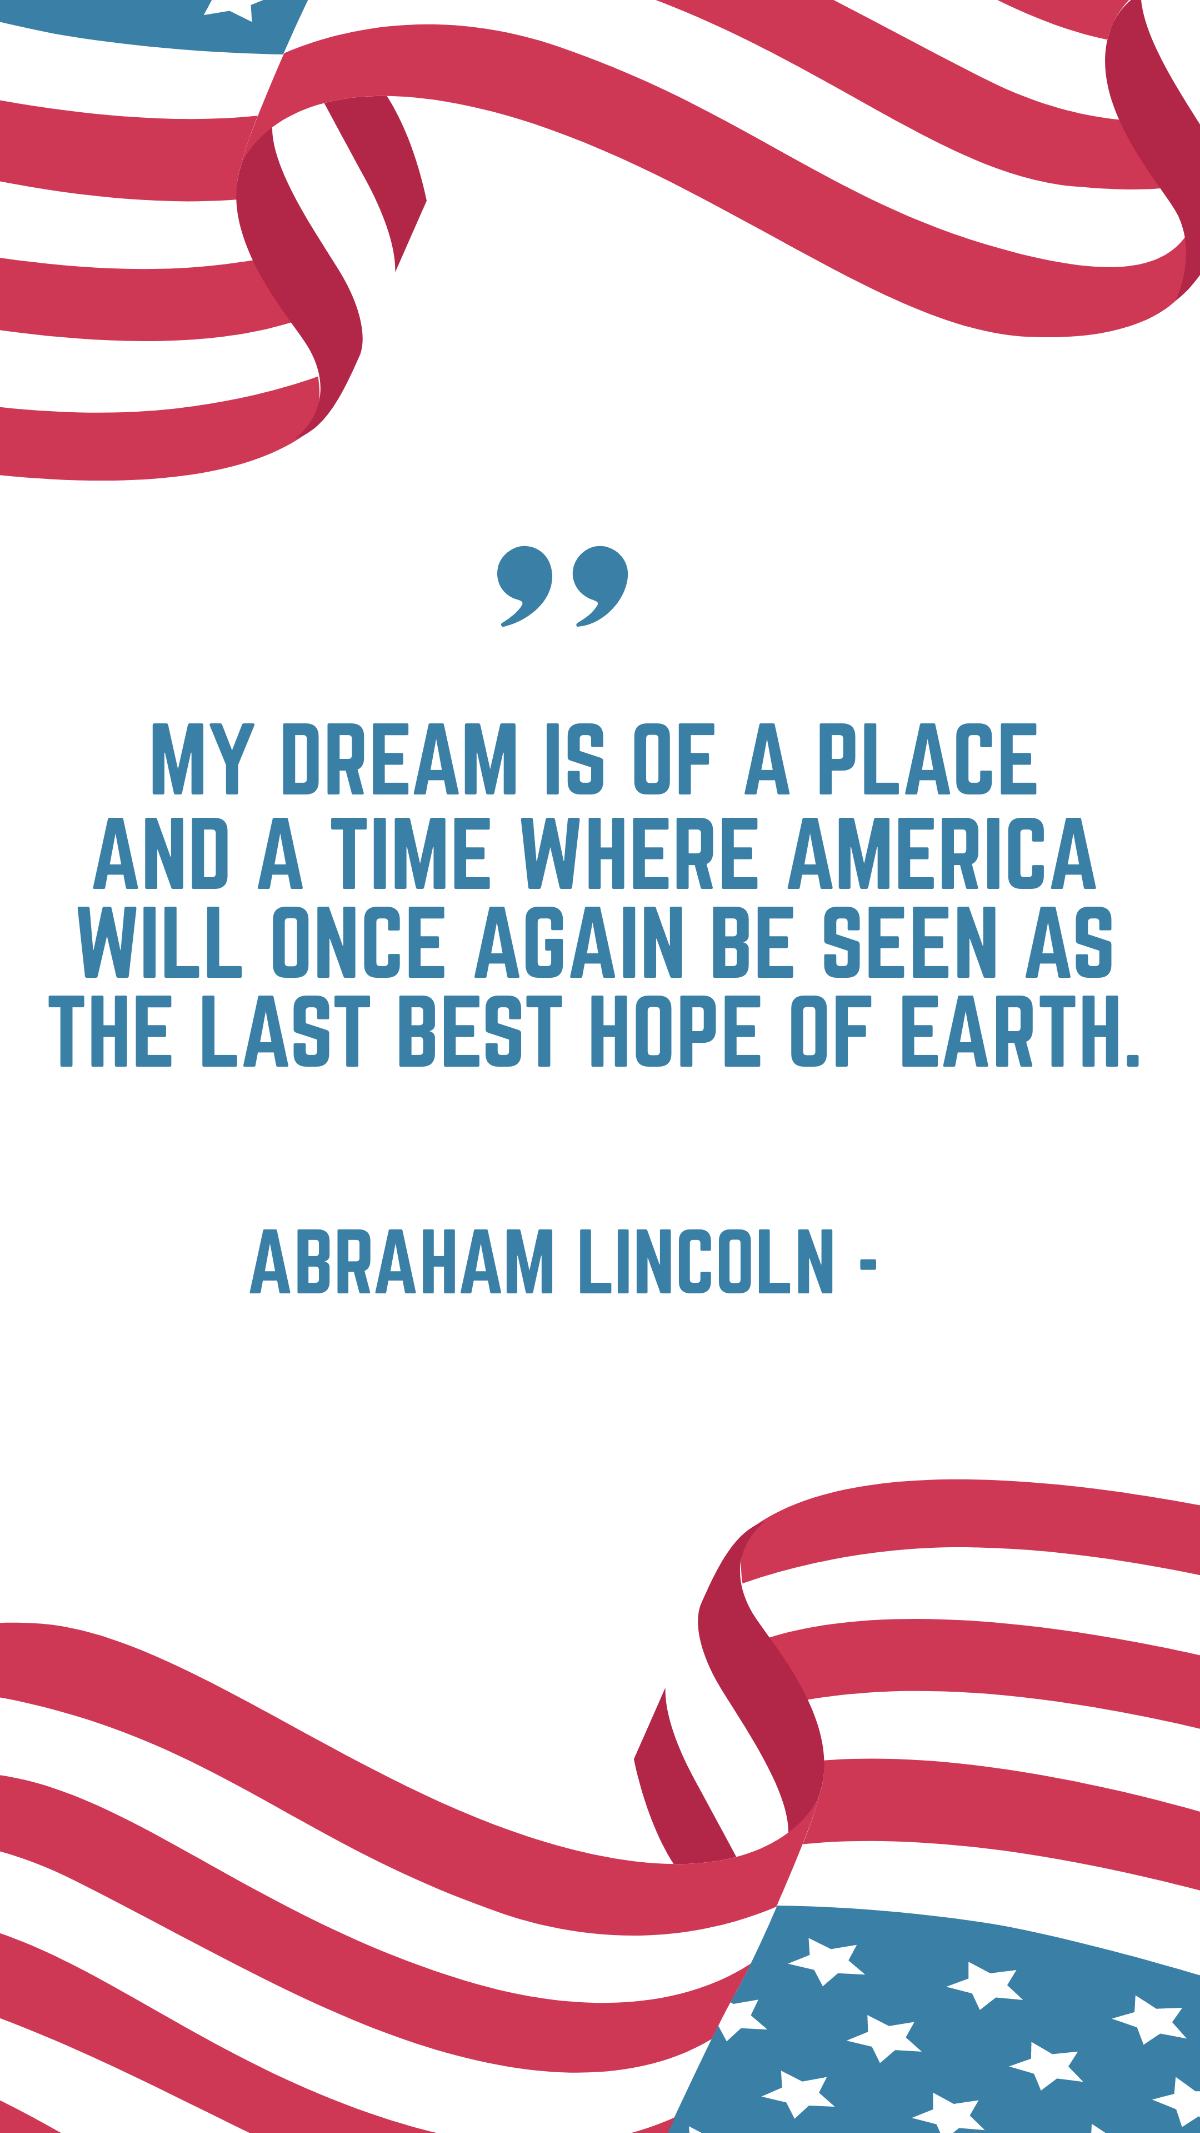 Abraham Lincoln - My dream is of a place and a time where America will once again be seen as the last best hope of earth. Template